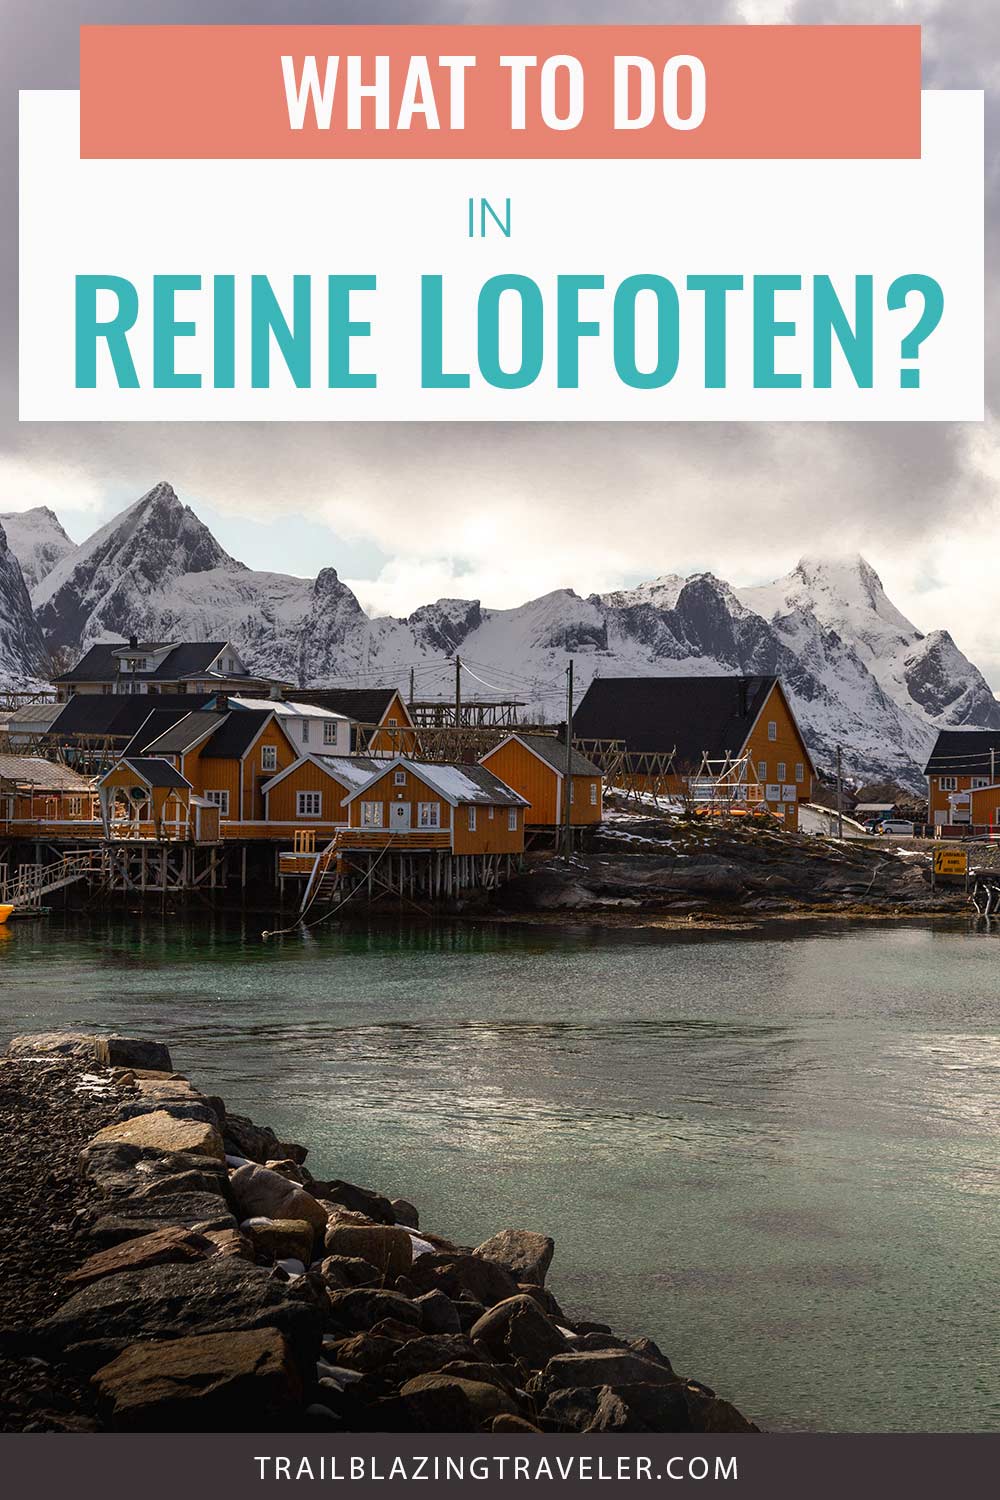 Houses in front of mountains near a lake - What To Do In Reine Lofoten?